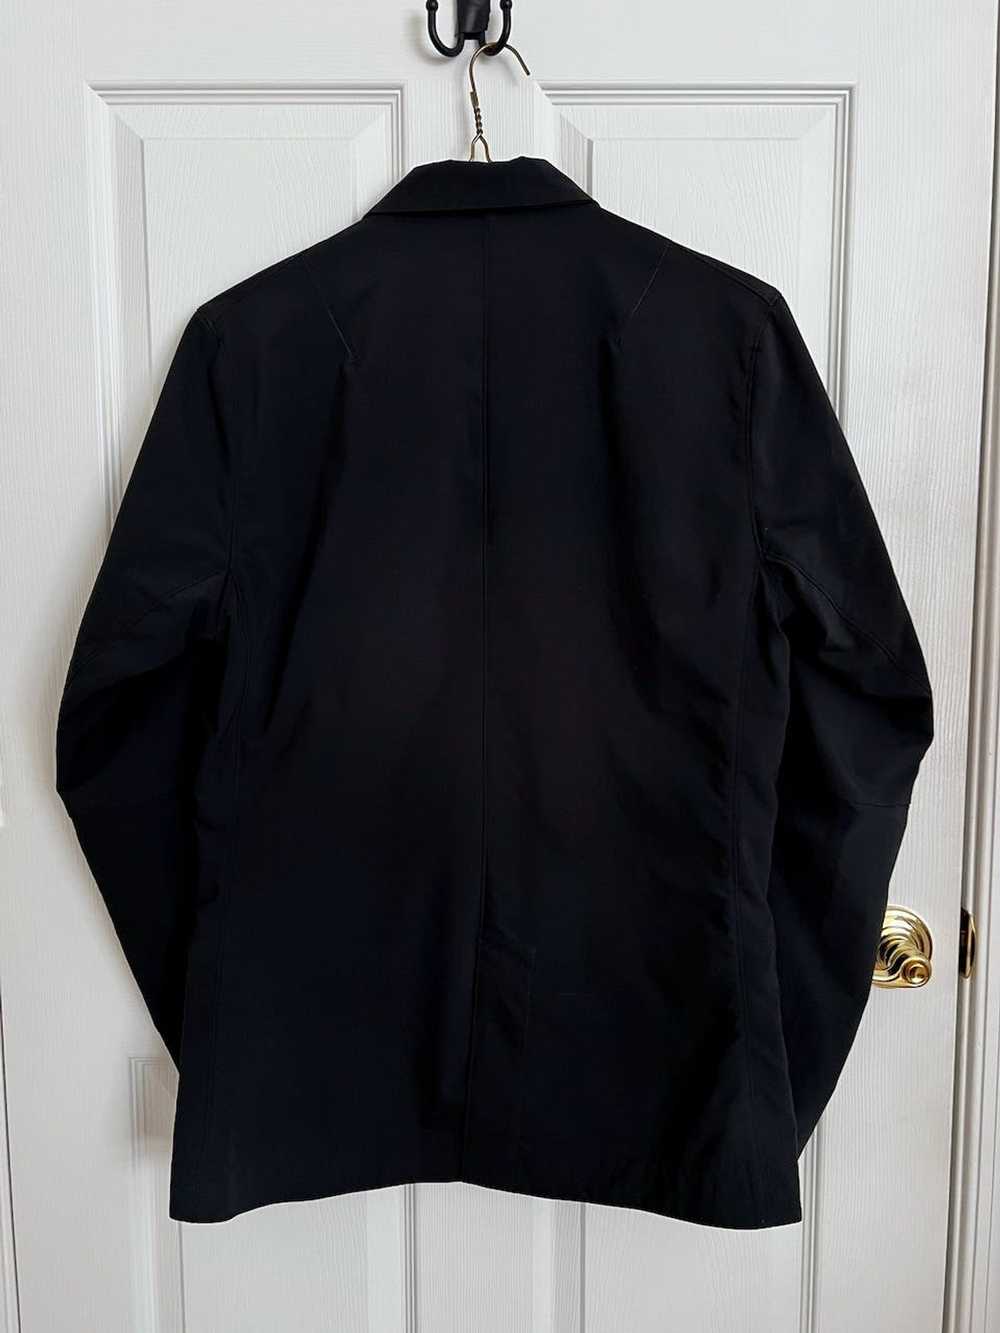 Nau Stretch Recycled Polyester Commuter Jacket - image 4